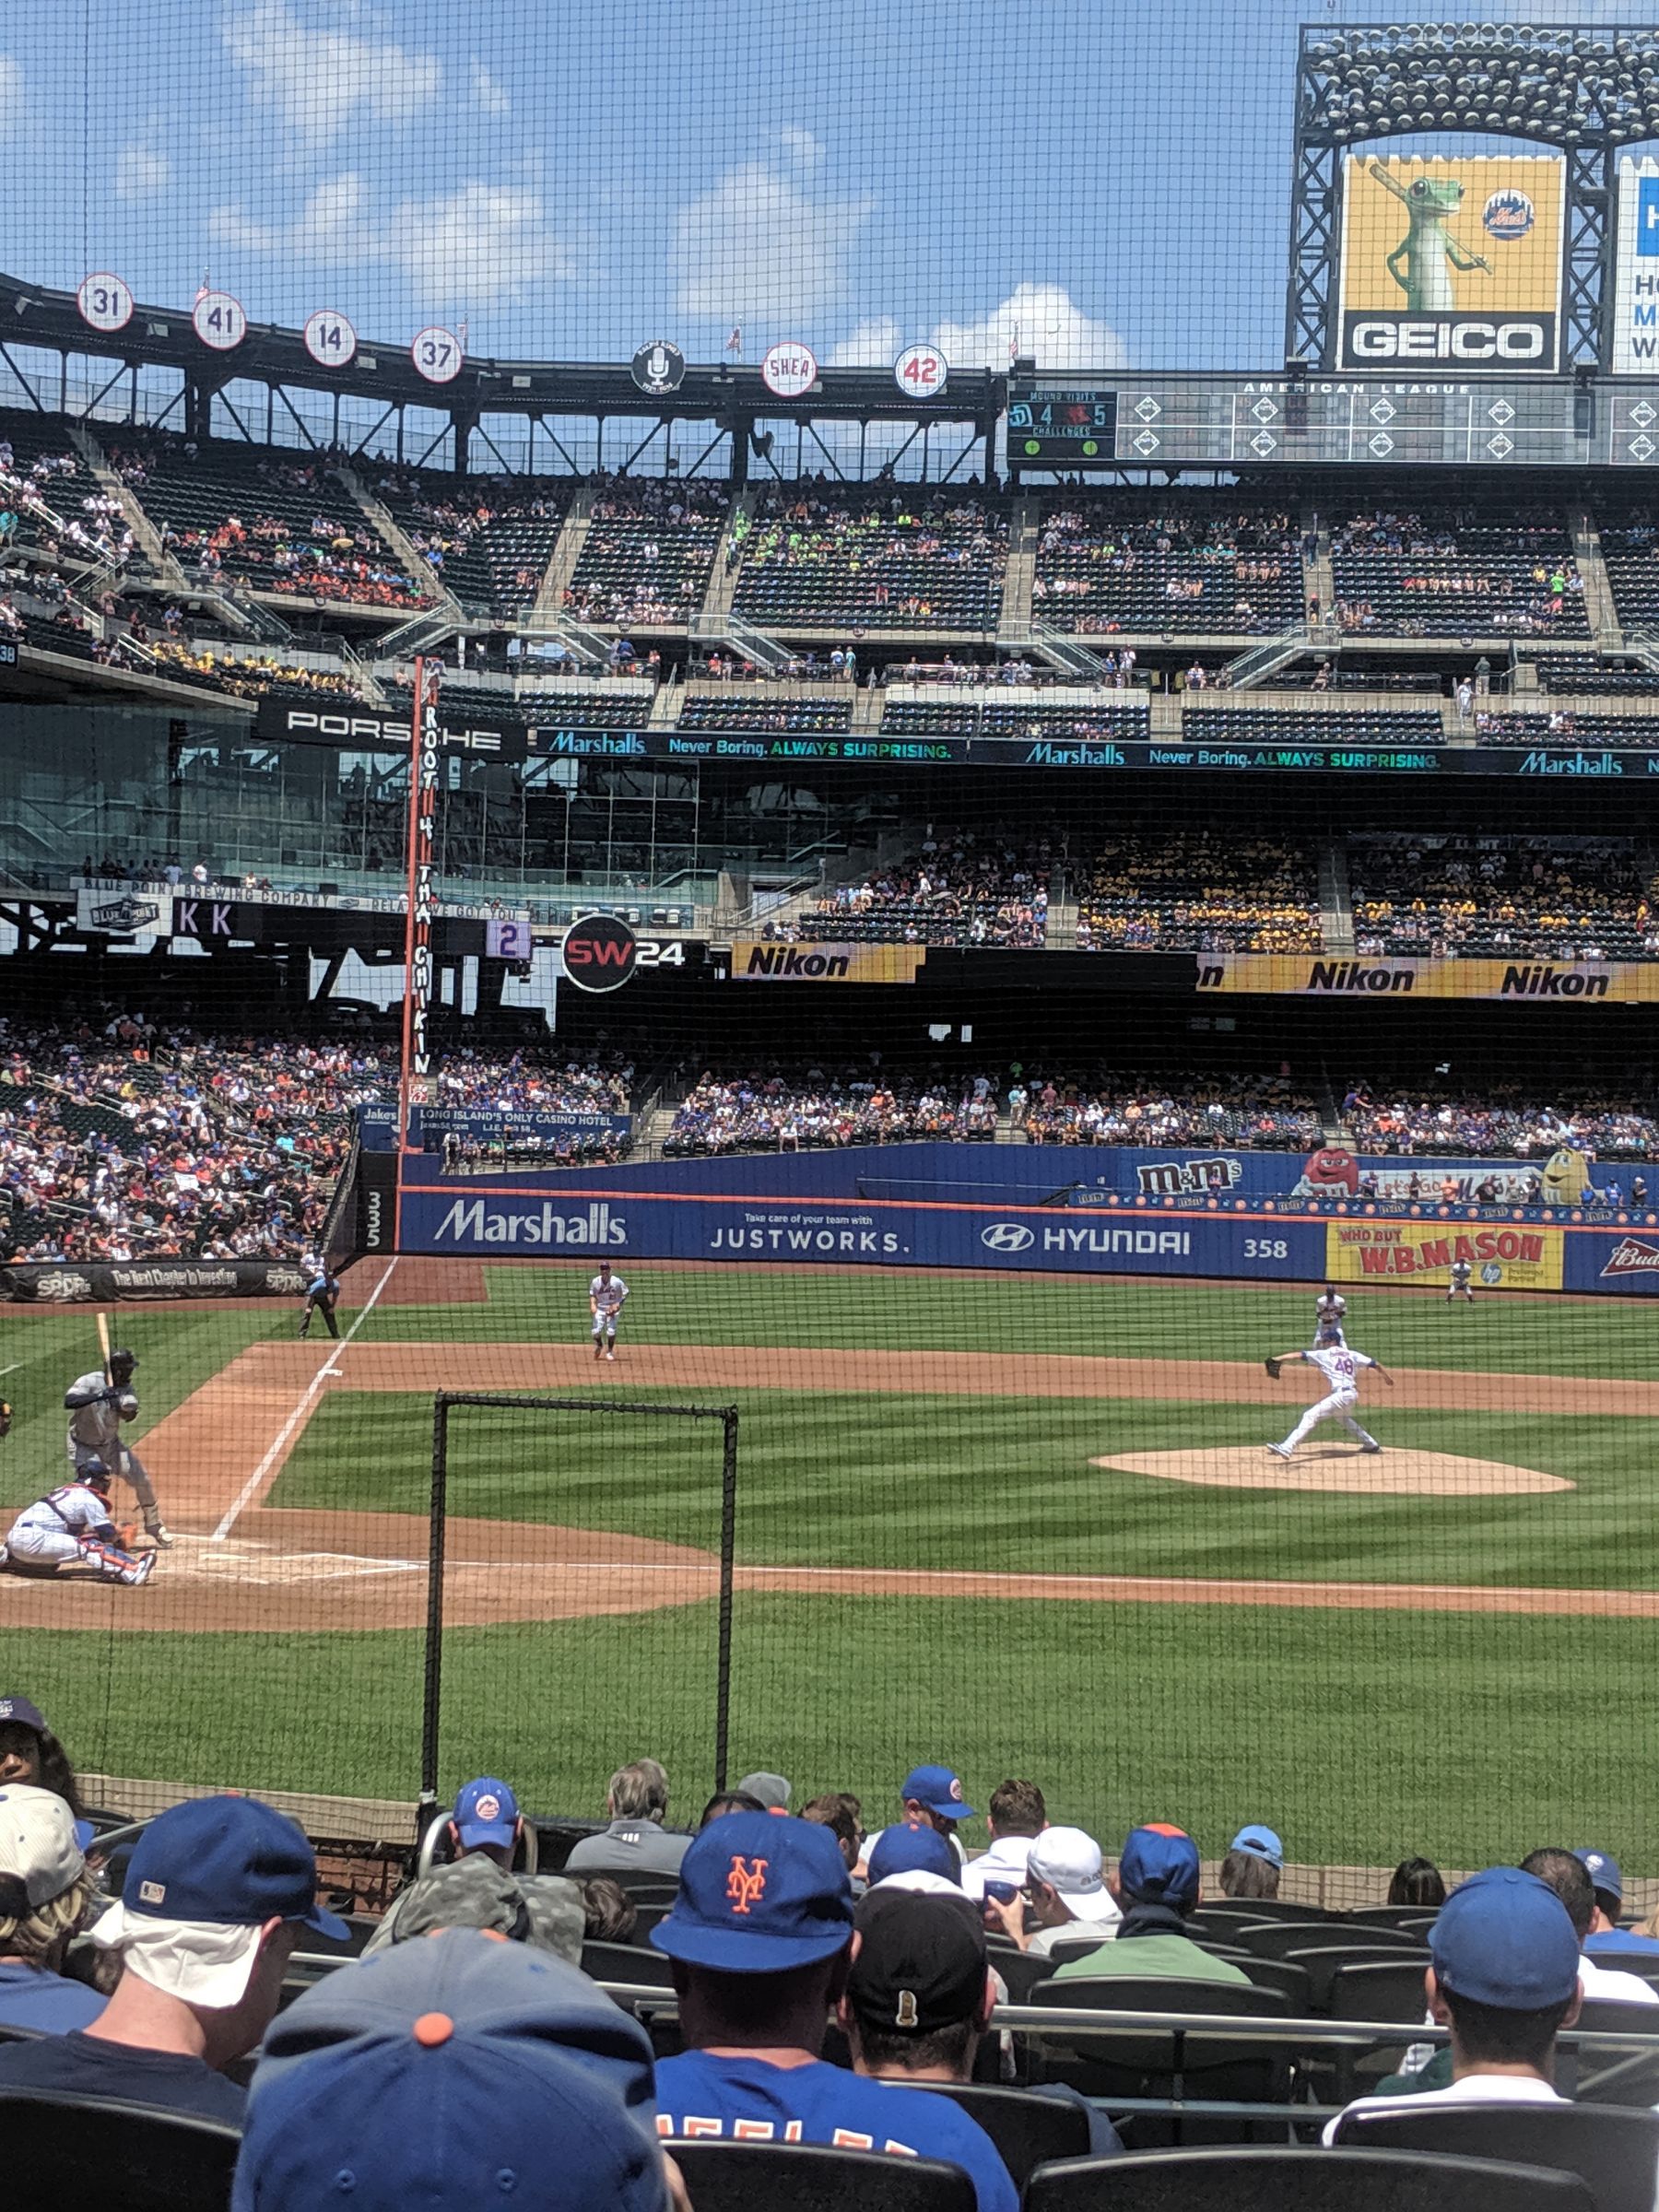 section 13, row 14 seat view  - citi field